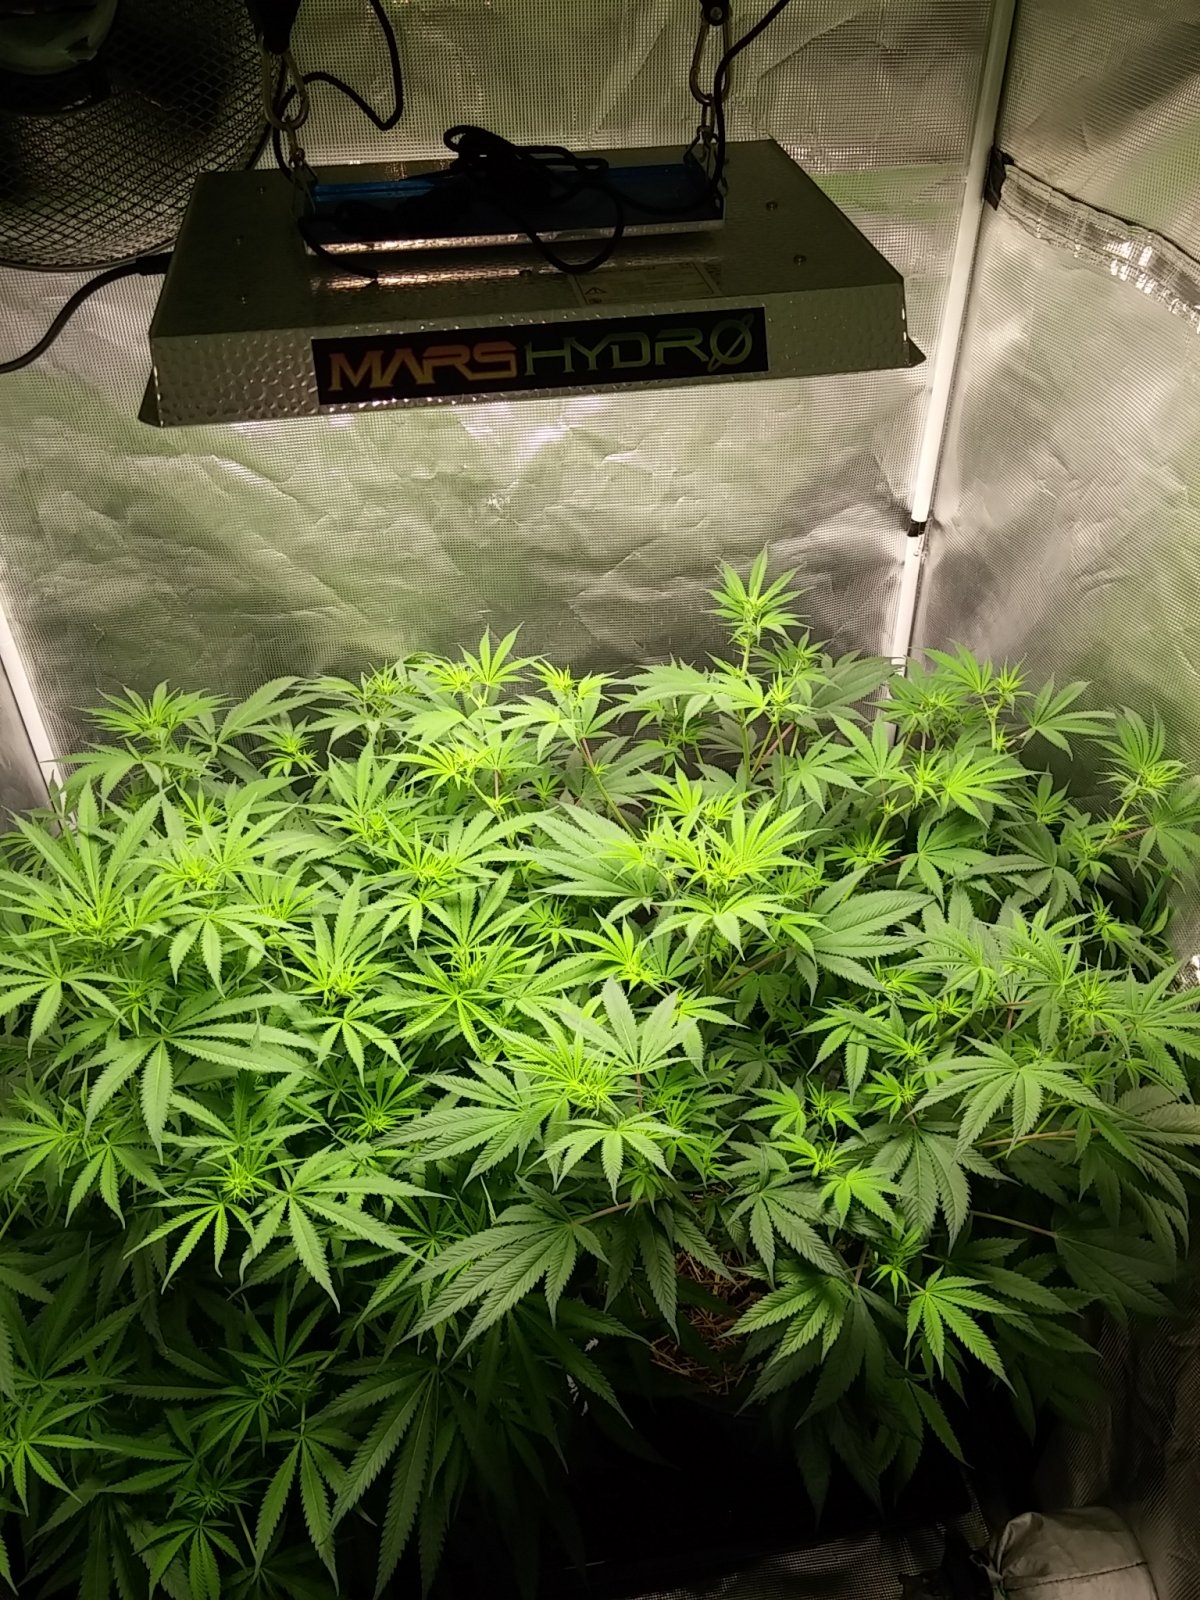 Mars Hydro TS1000 Review - You Don't NEED Grow Lights, But You